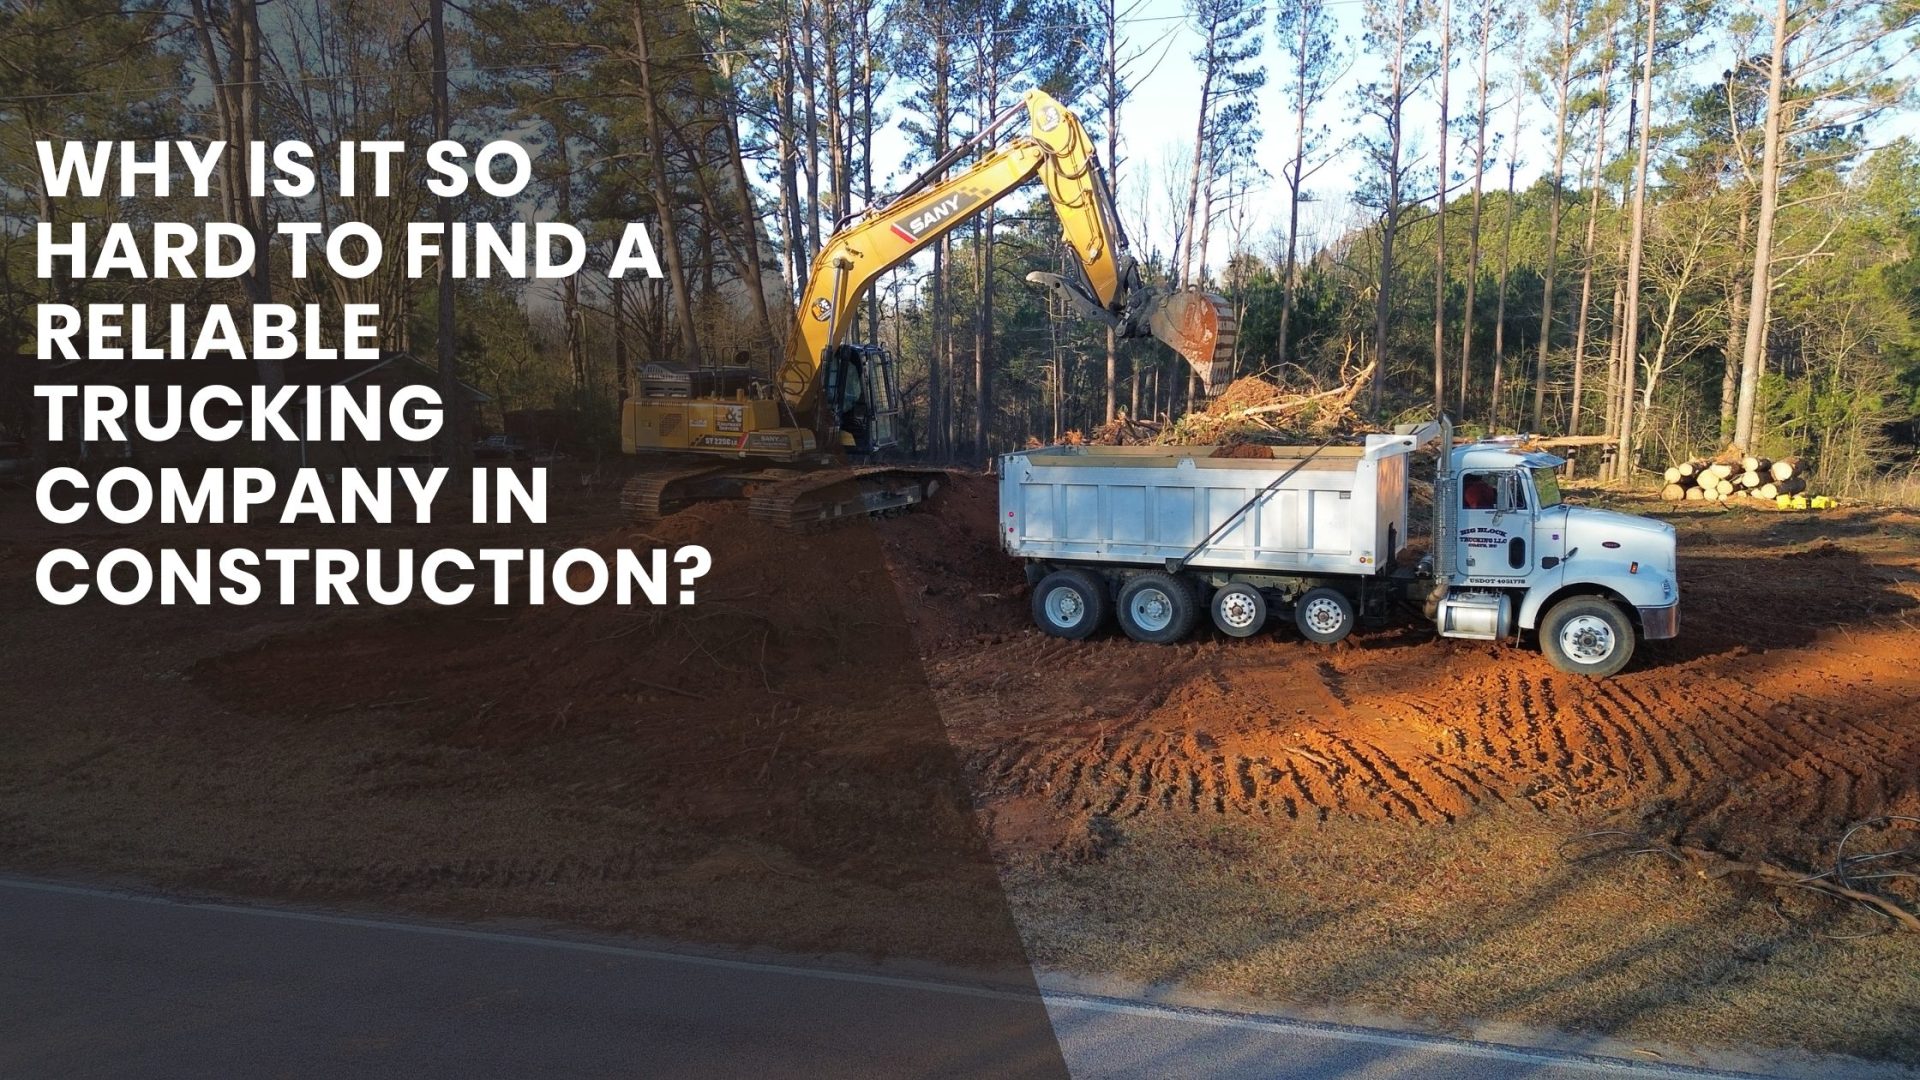 Why is it So Hard to Find a Reliable Trucking Company in Construction?